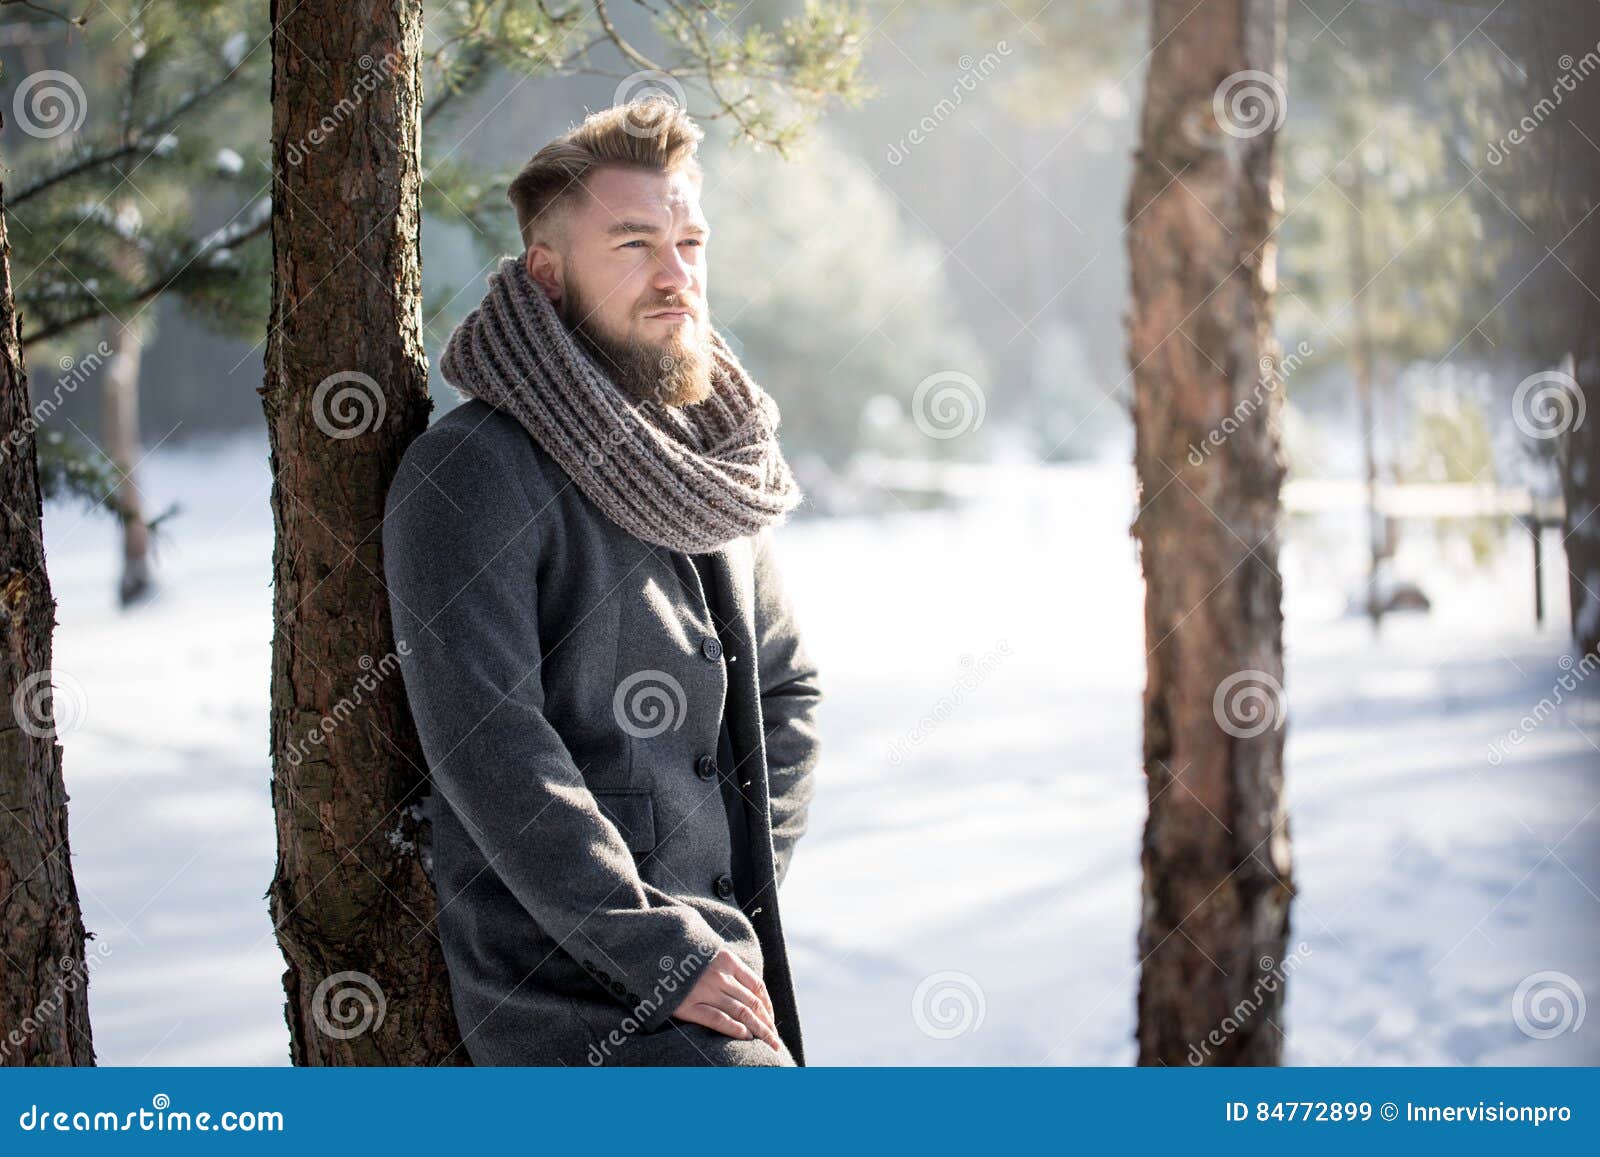 Stylish Man in Winter Scenery Stock Image - Image of confidence ...